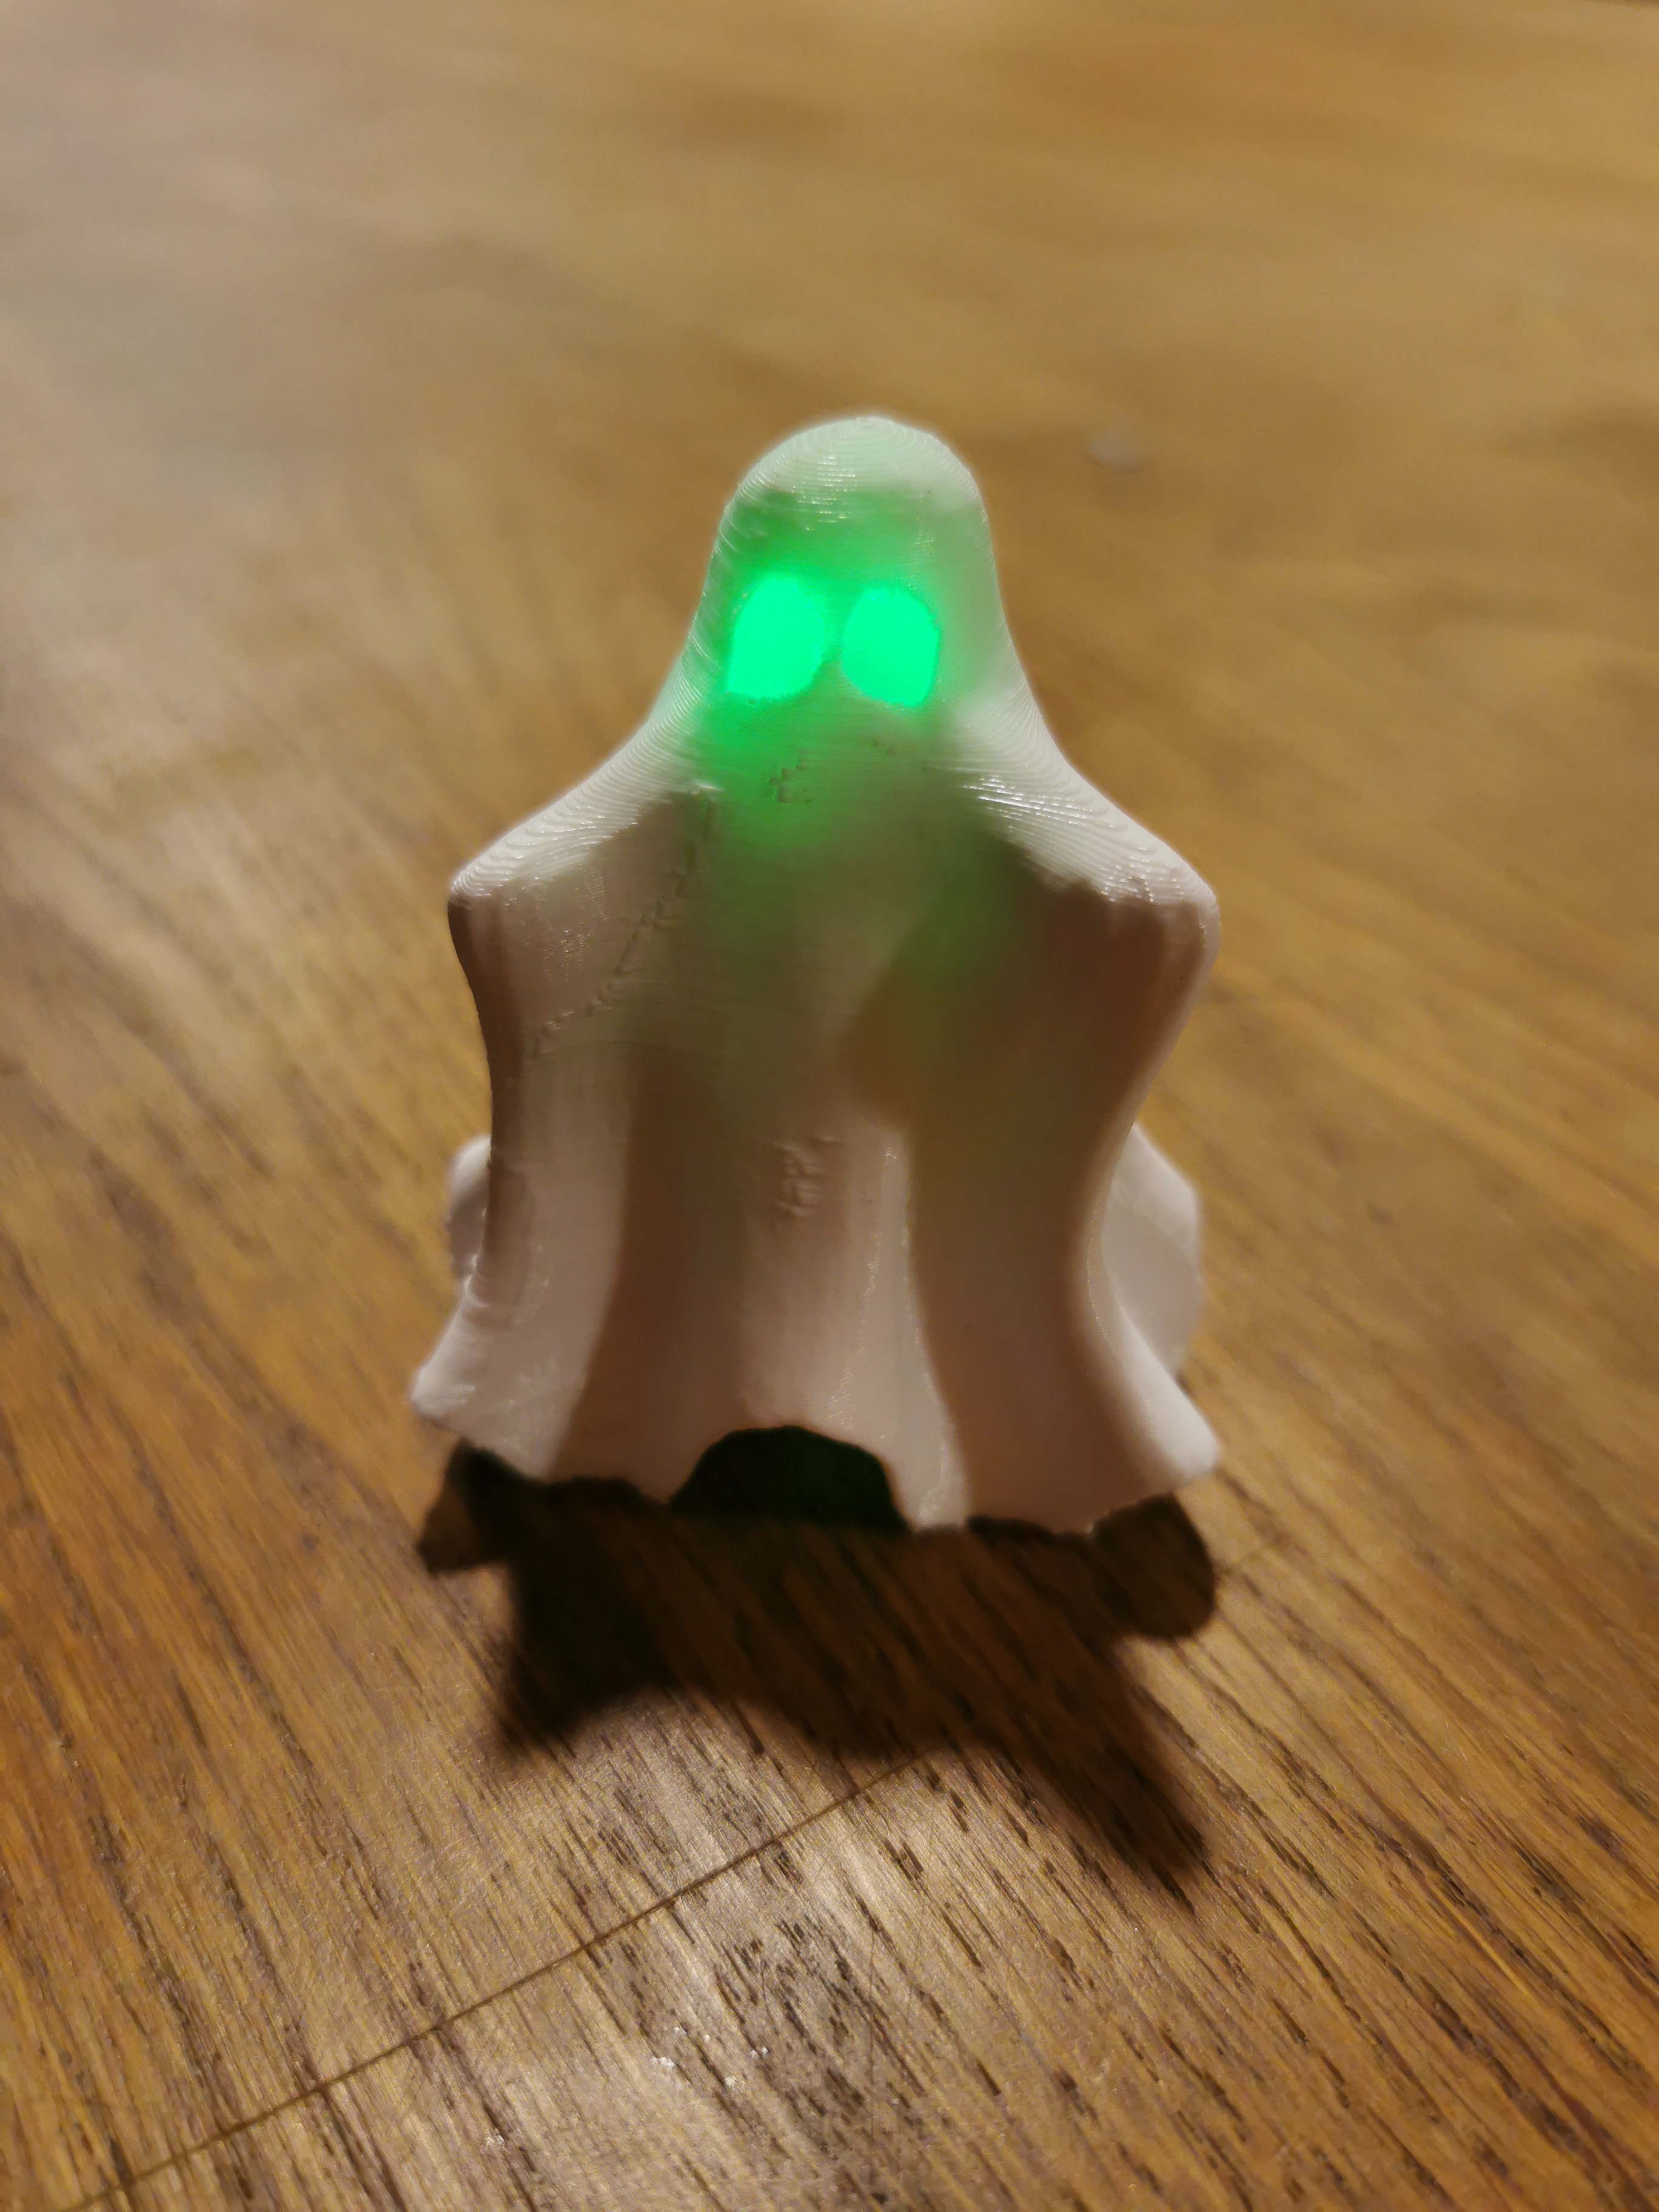 A 3D printed ghost with a green light inside